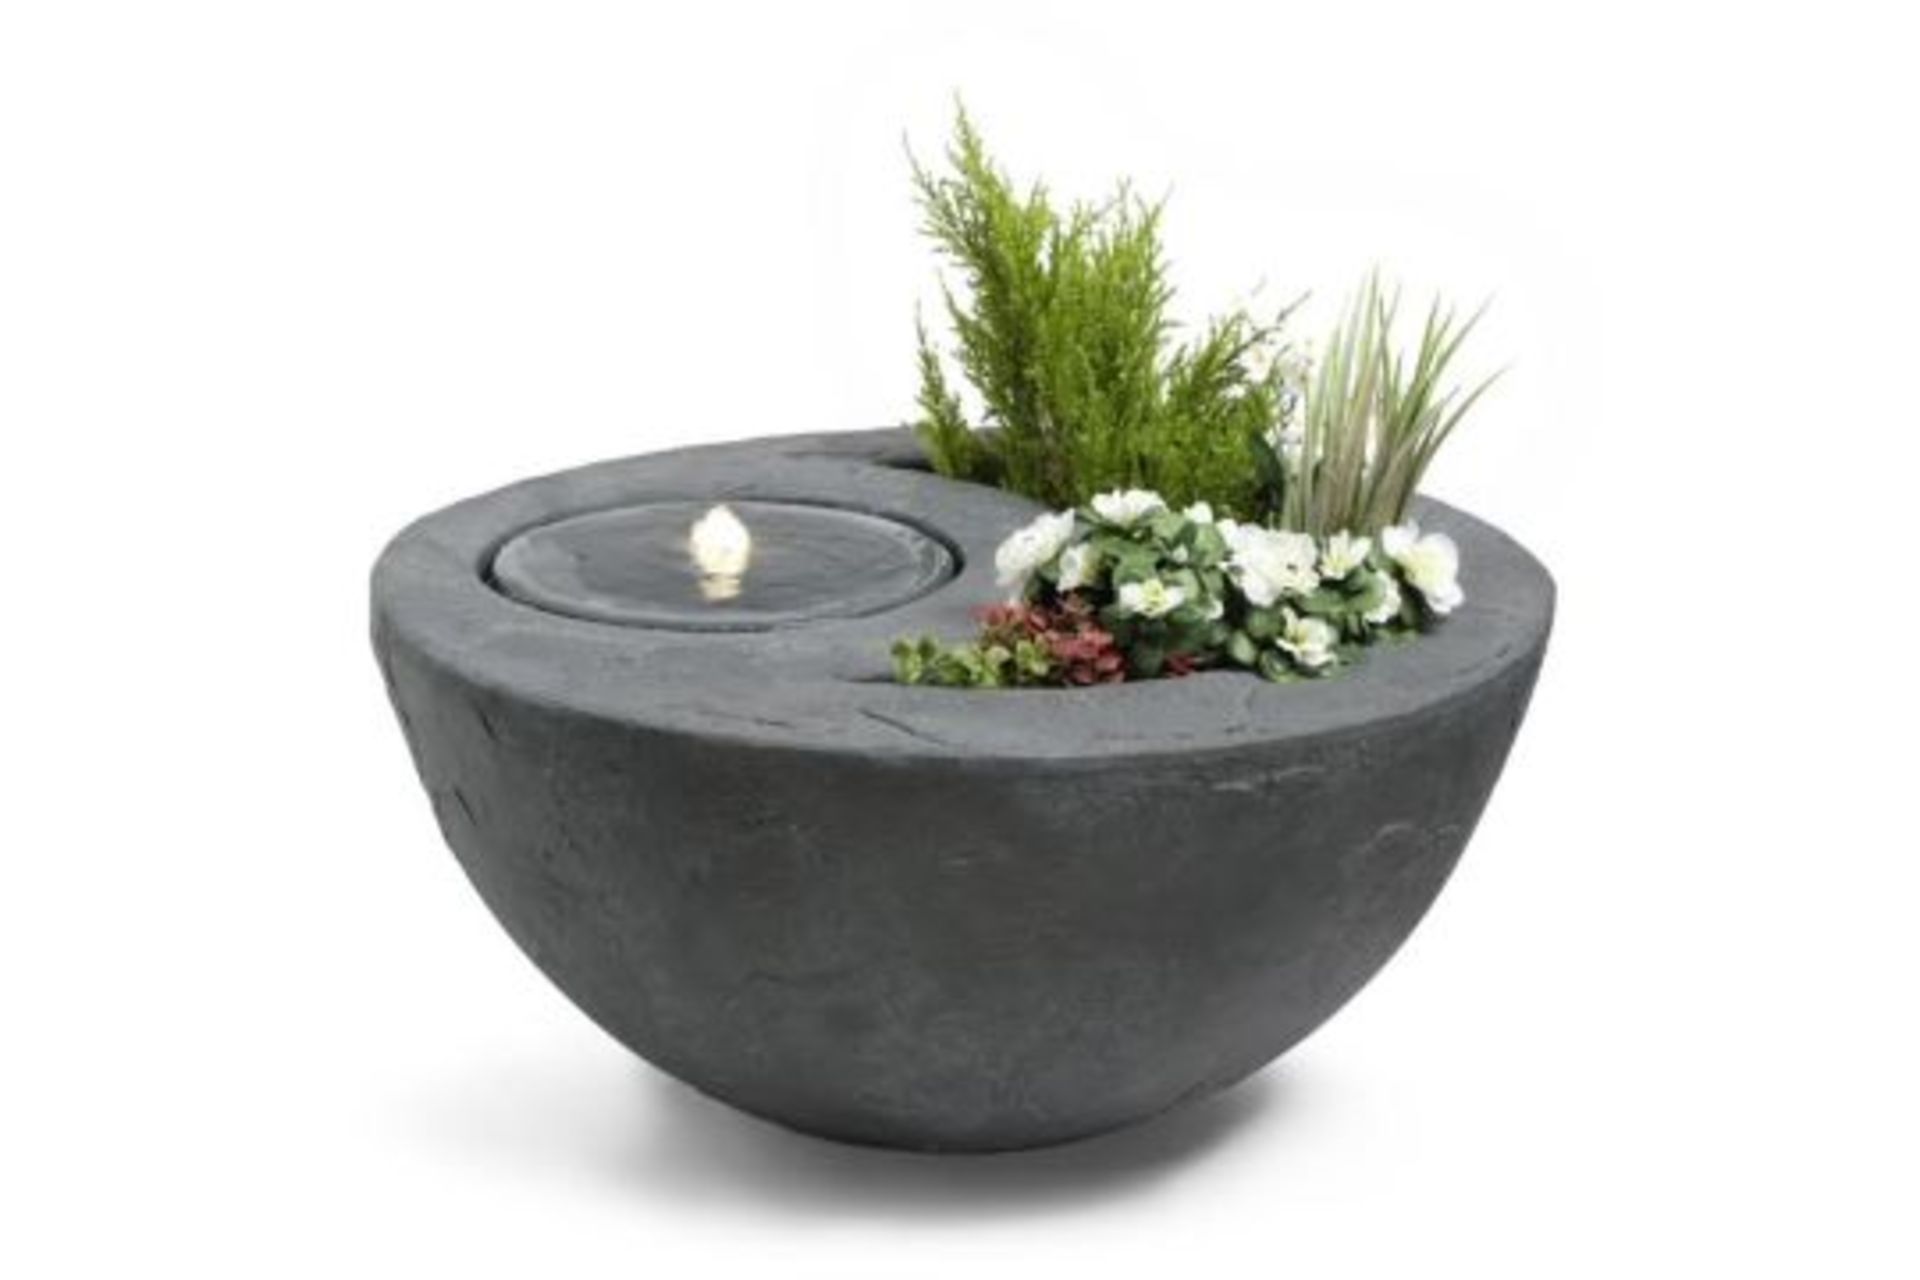 Trade Lot 8 x New & Boxed Dual Water Feature and Planter. RRP £299.99 (REF726) - Garden Bowl - Image 4 of 6